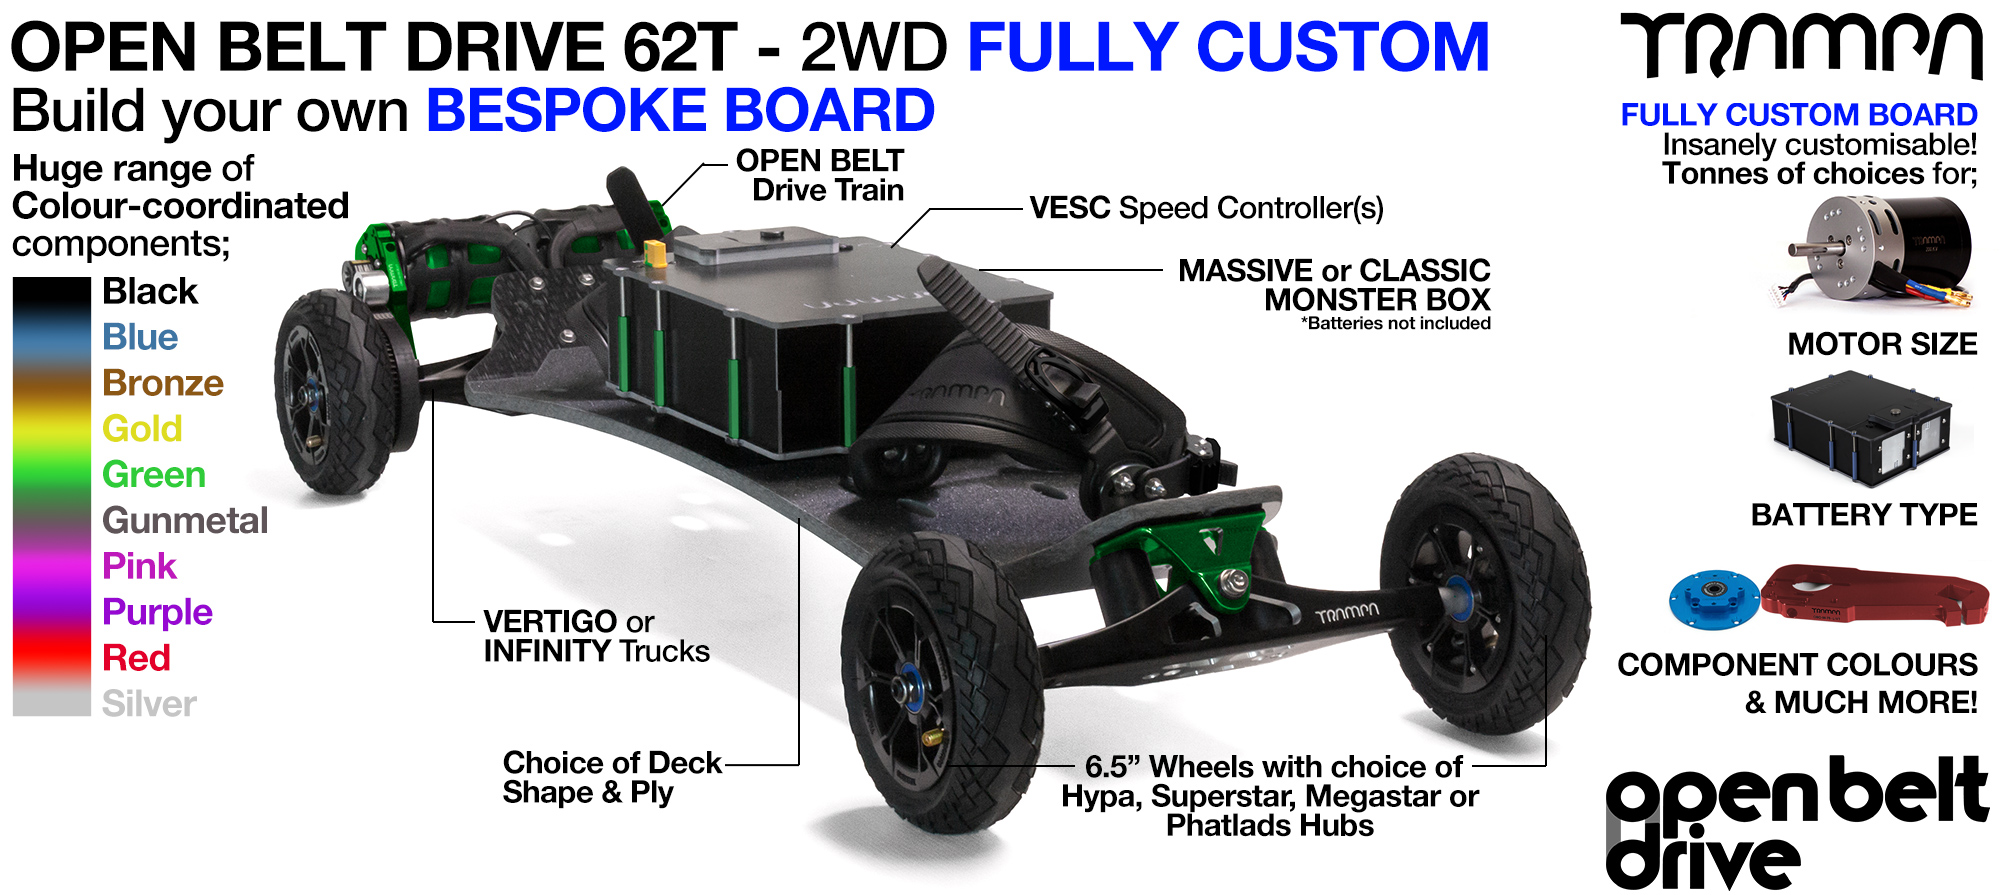 2WD 66T Open Belt Drive TRAMPA Electric Mountainboard with 6 Inch URBAN TREADs Wheels & 62 Tooth Pulleys - CUSTOM